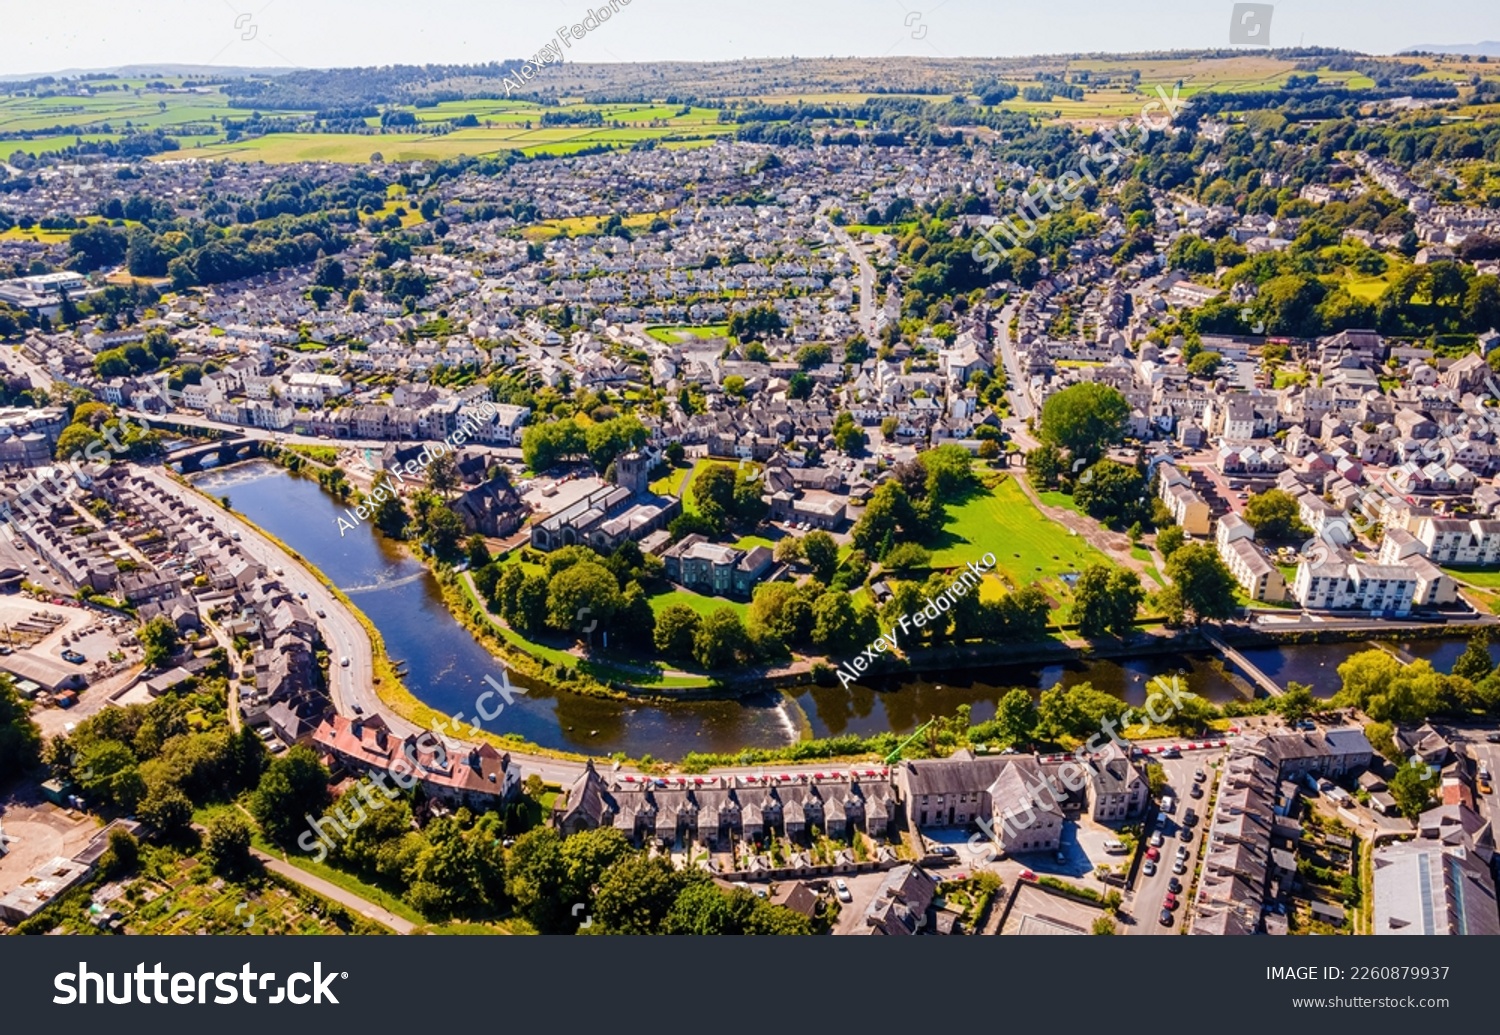 Aerial view of Kendal in Lake District, a region and national park in Cumbria in northwest England, UK #2260879937